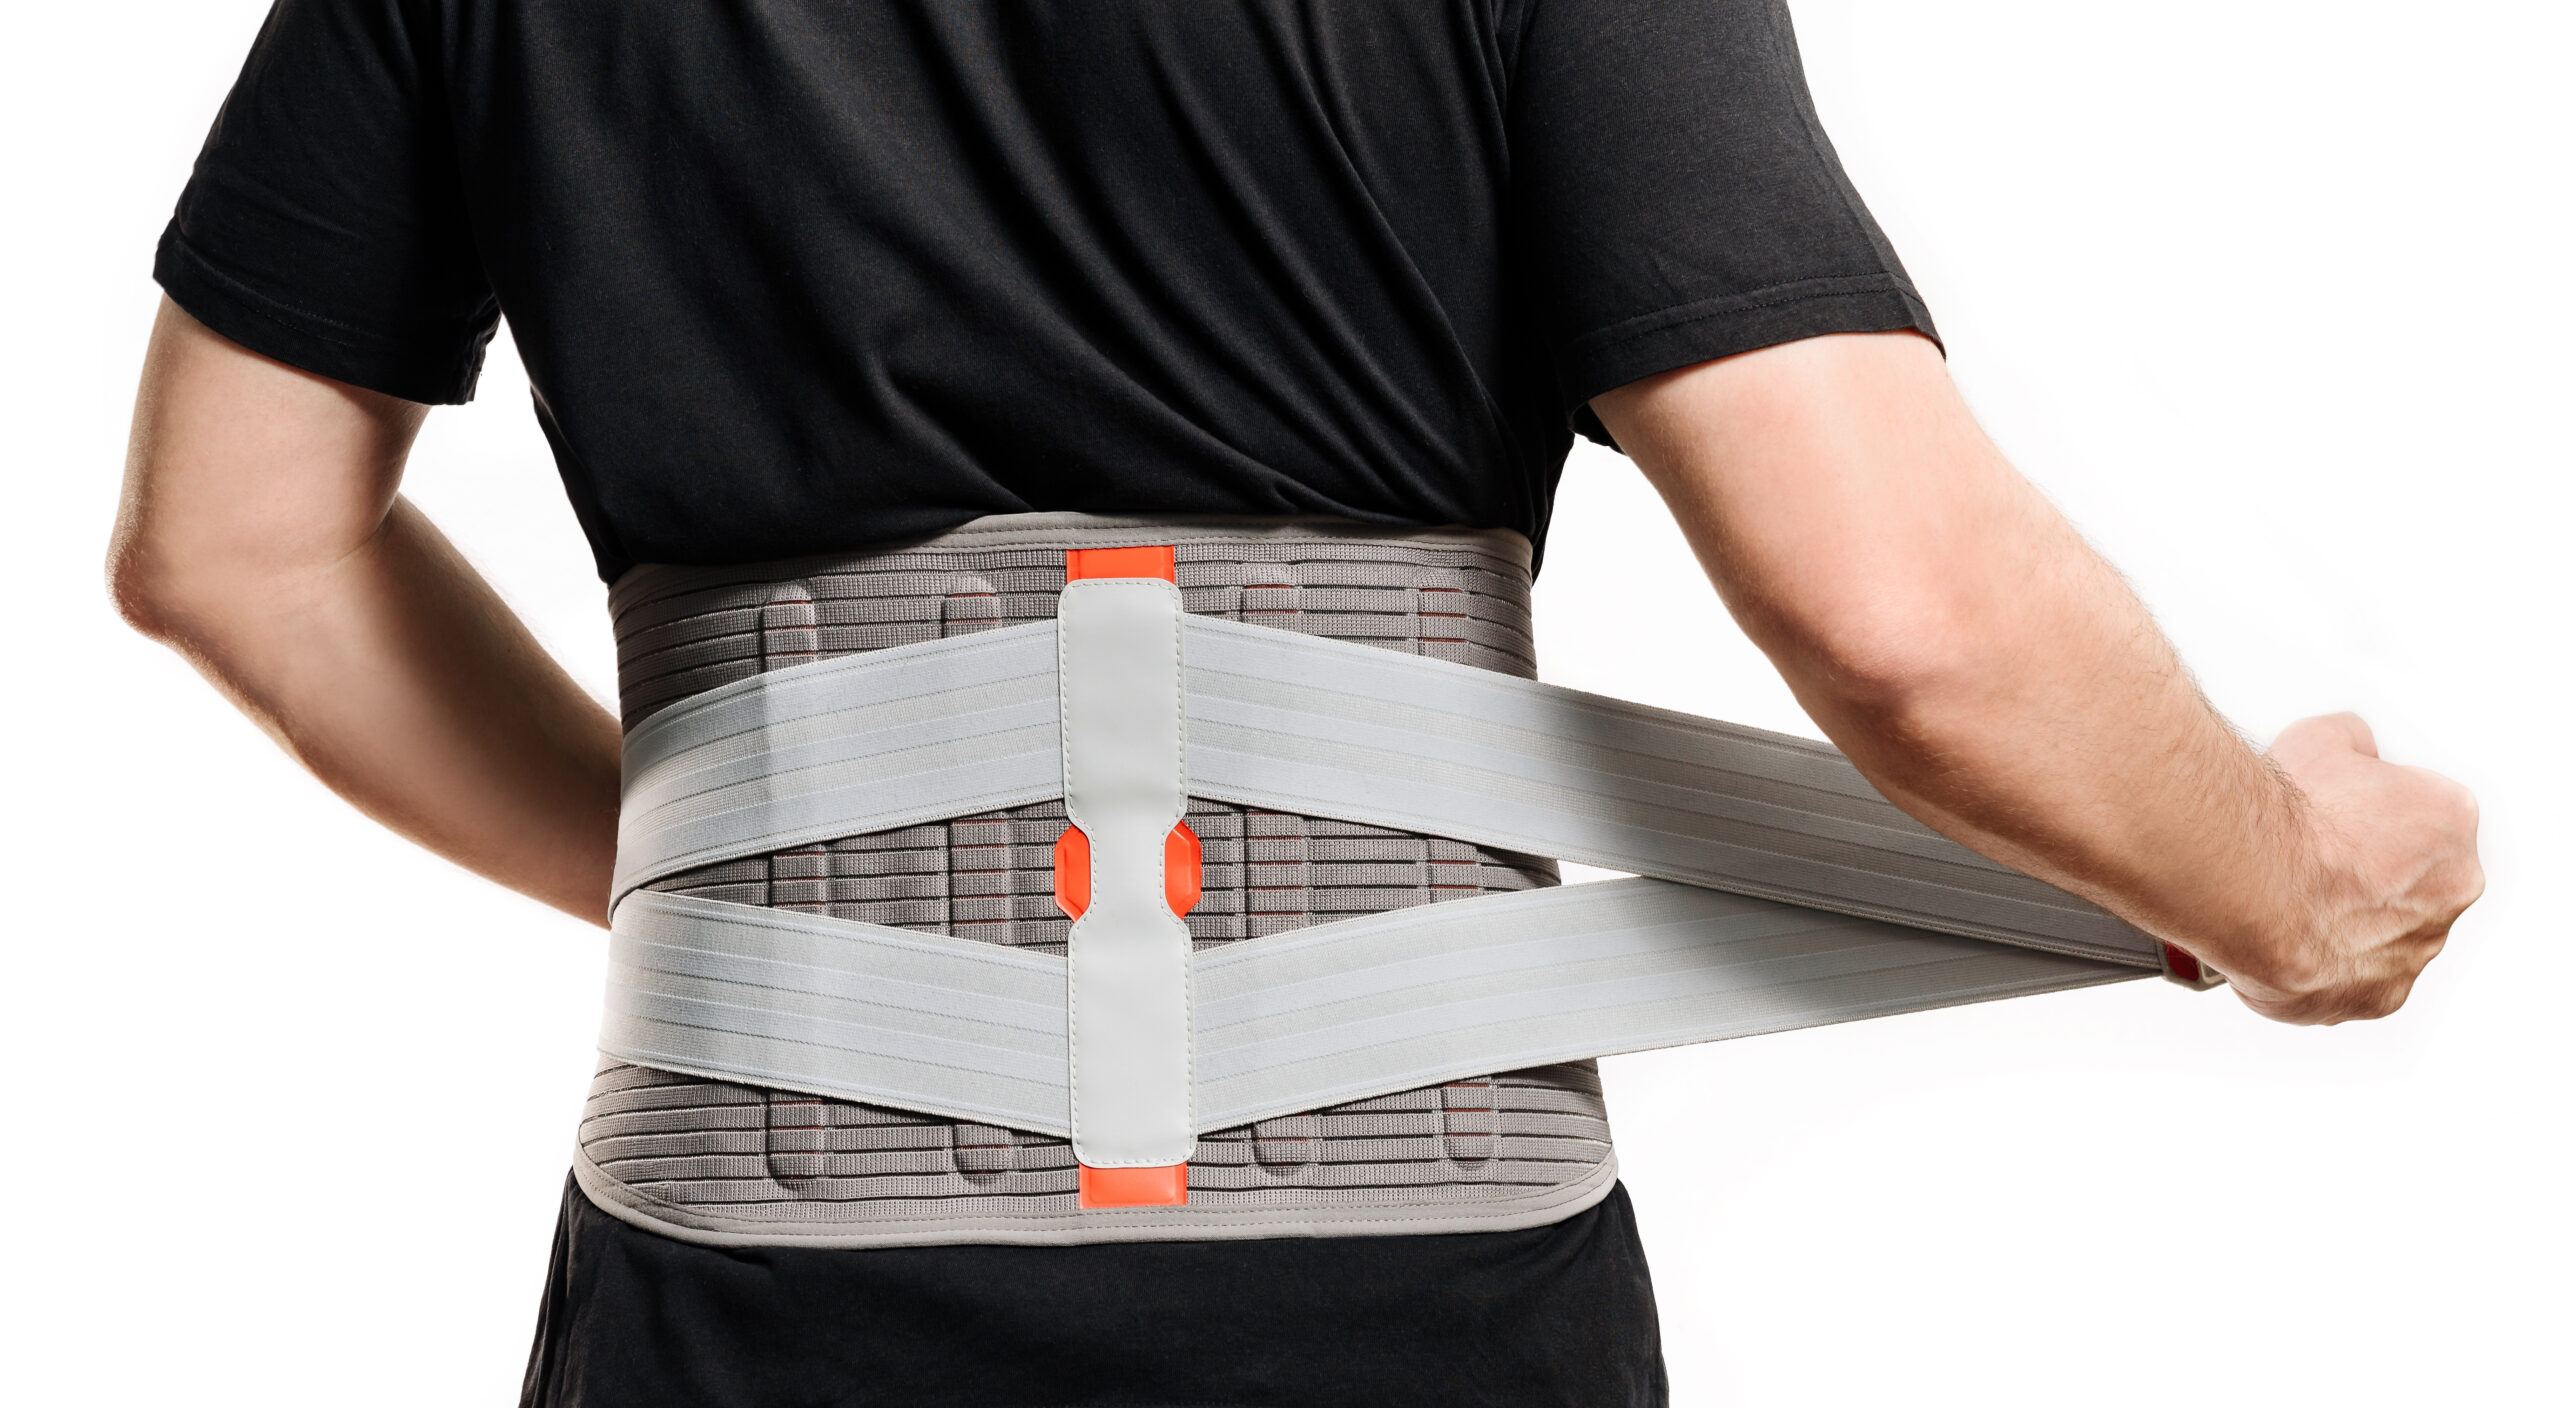 Decoding the Back Brace: Materials, Design, and Effectiveness